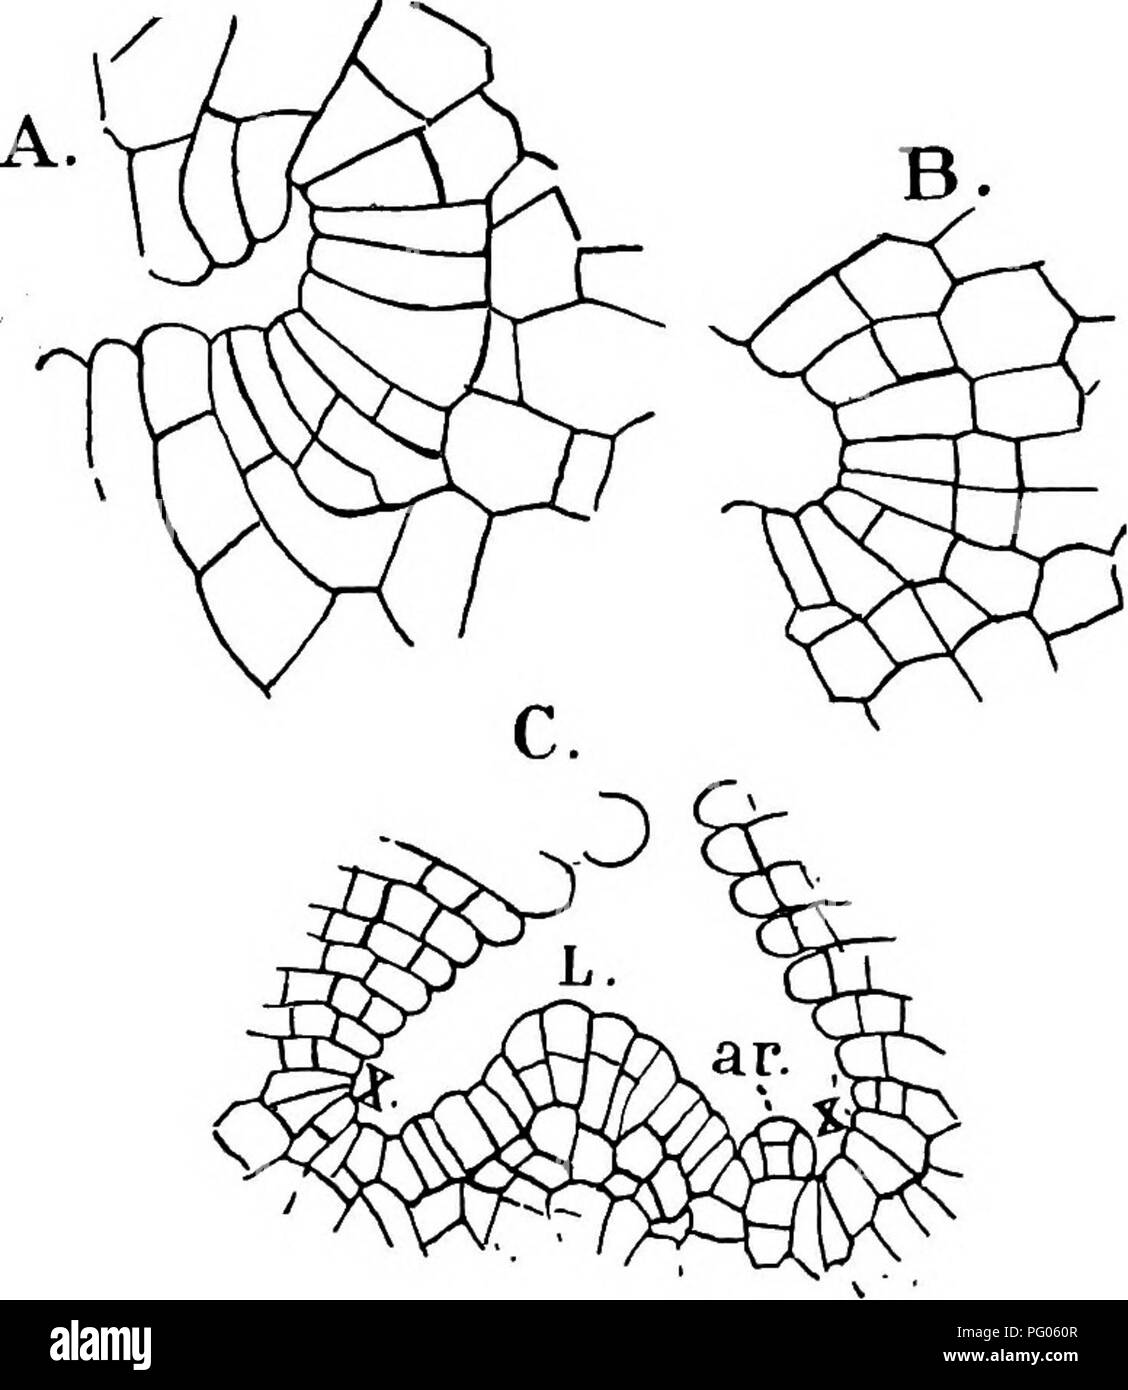 . The structure and development of mosses and ferns (Archegoniatae). Plant morphology; Mosses; Ferns. 26 MOSSES AND FERNS CHAP. In Riccia glauca, as well as other species, the uppermost cell of each row often enlarges very much, and with its fellows in the other rows constitutes the epidermis. According to Leitgeb's researches this epidermal cell is formed by the first division in the outer cell of the segment, and either undergoes no further division, or by dividing once by a transverse wall forms a two- layered epidermis ( R. BischoMi). On the ventral side the odter cells of the segments pro Stock Photo